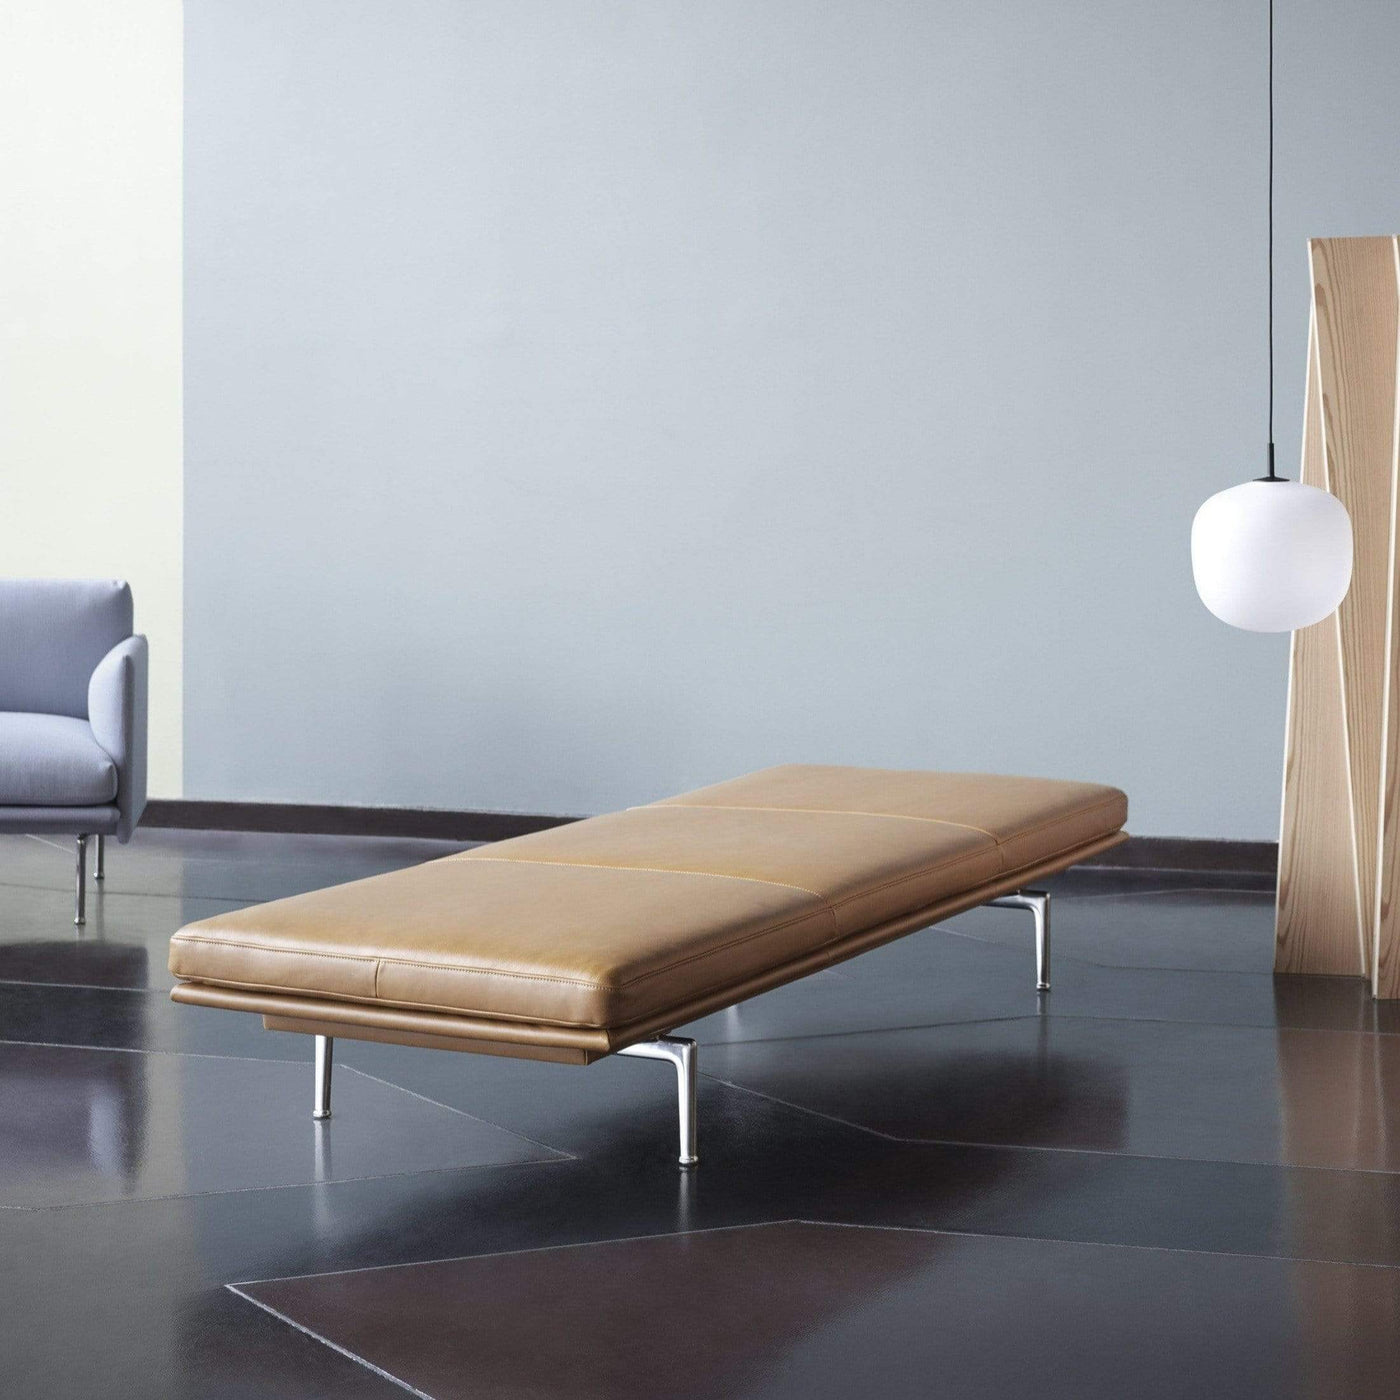 Muuto Outline Daybed in cognac refine leather and polished aluminium base. Made to order from someday designs. #colour_cognac-refine-leather